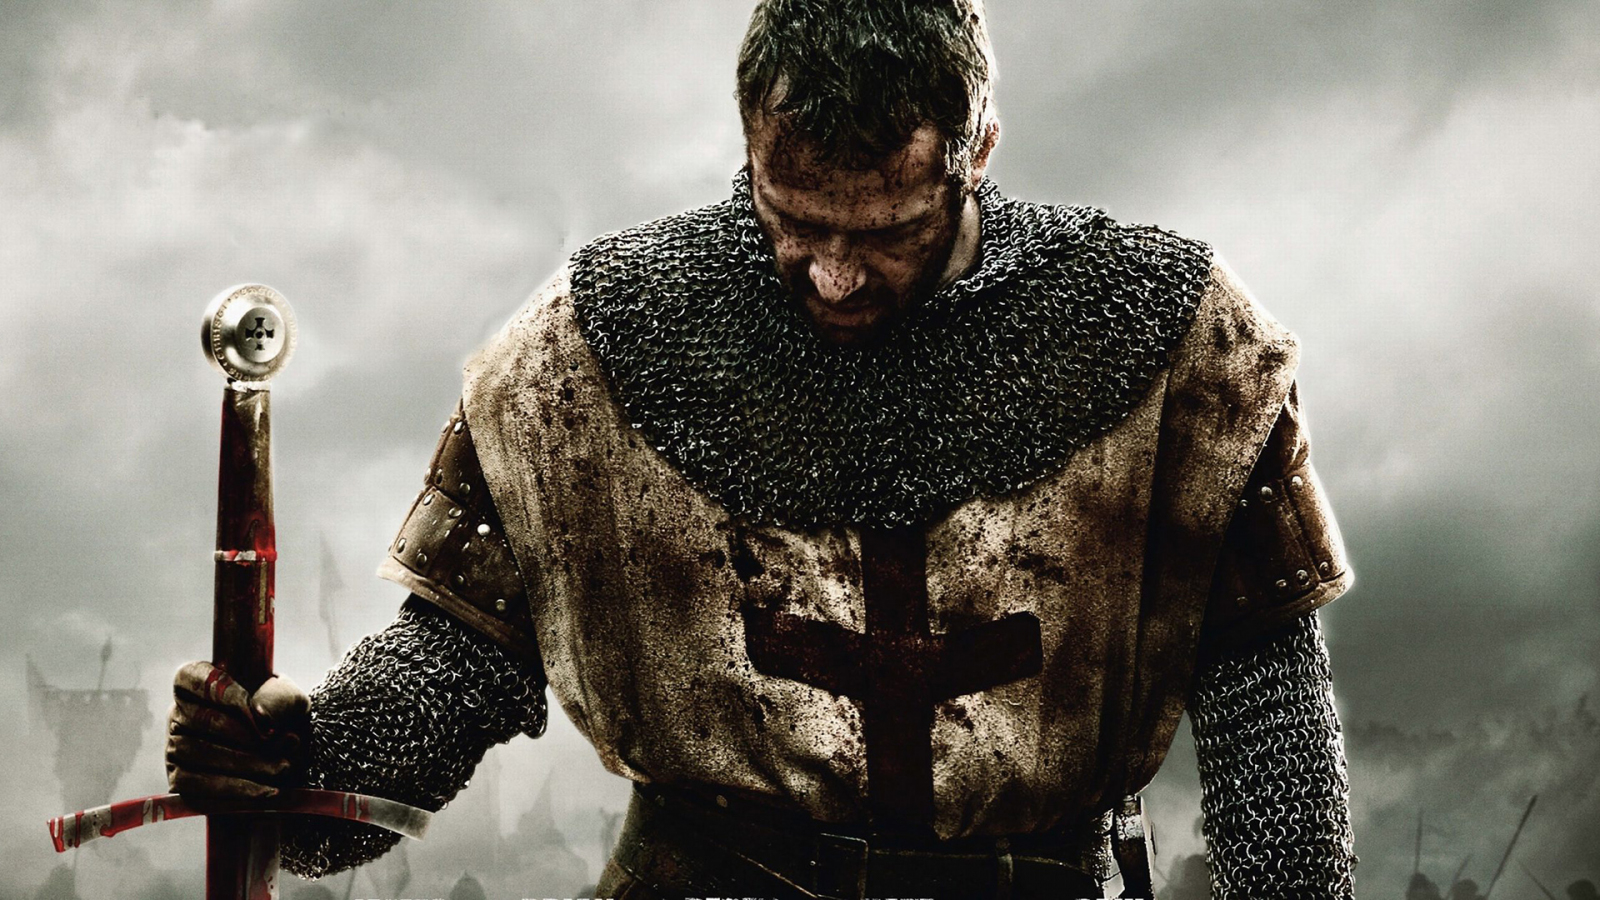 Download 1600x900 Wallpaper James Purefoy In Ironclad, 2011 Movie, Knight, Warrior, Widescreen 16: Widescreen, 1600x900 HD Image, Background, 10447